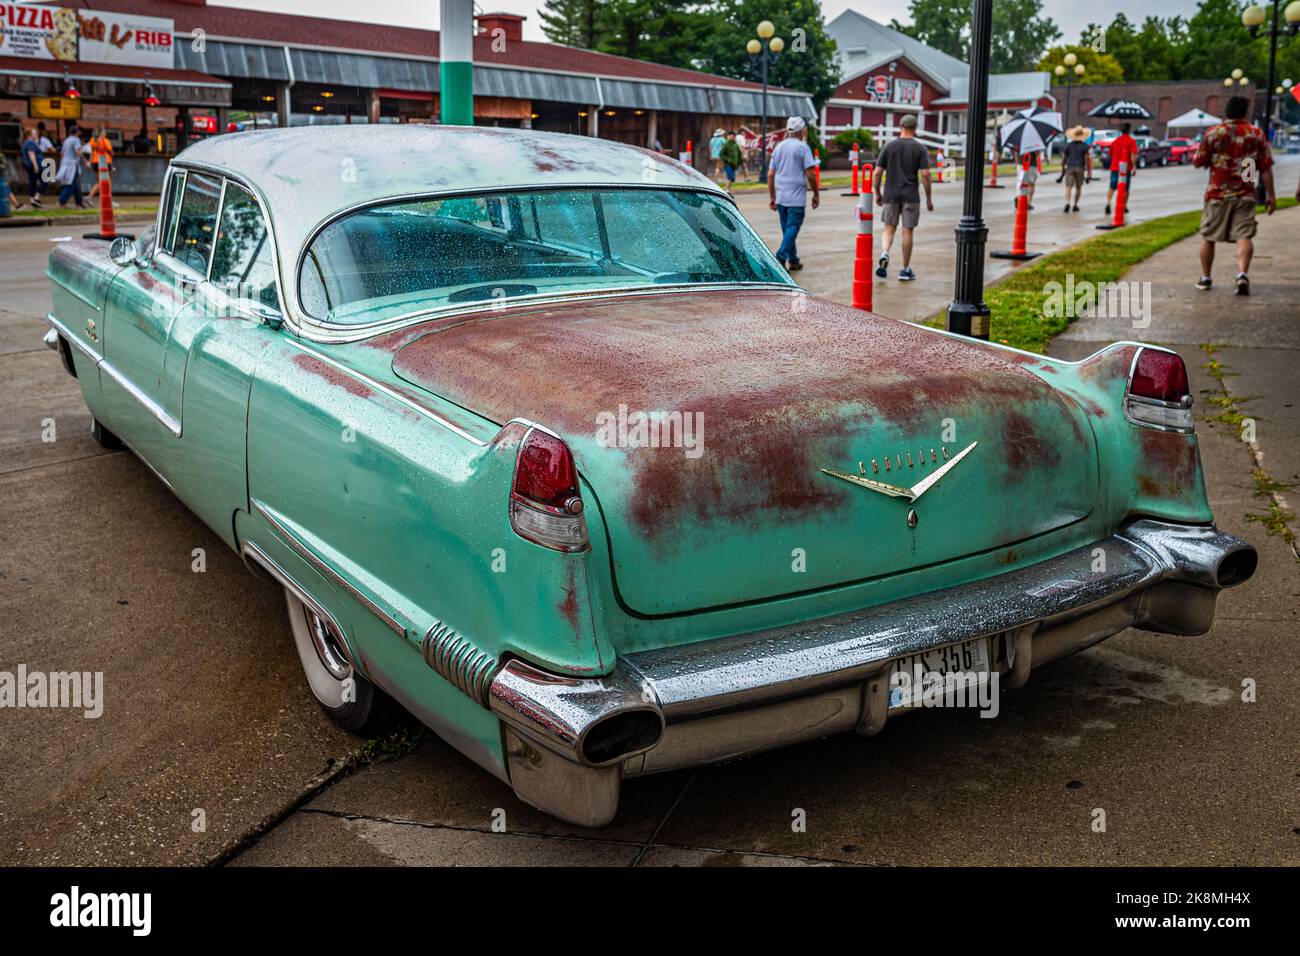 Des Moines, IA - July 01, 2022: High perspective rear corner view of a 1956 Cadillac 62 Sedan DeVille at a local car show. Stock Photo